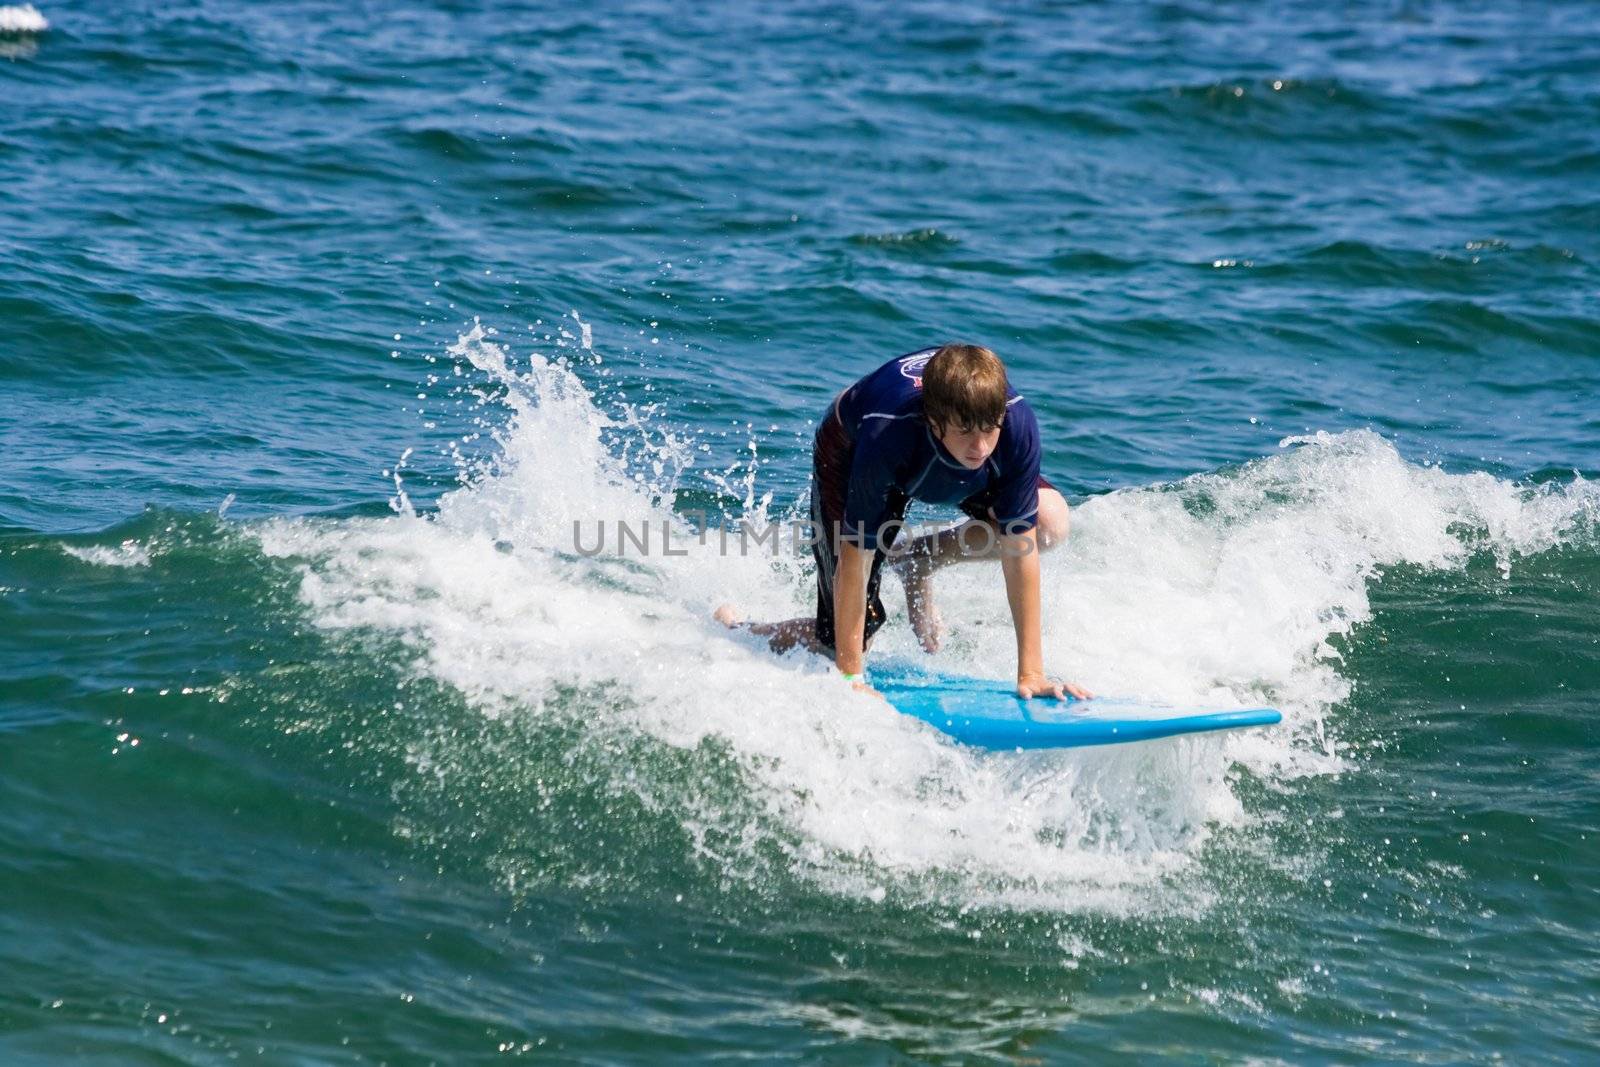 A teenager surfing. The boy is just beginning to stand up on the surfboard.